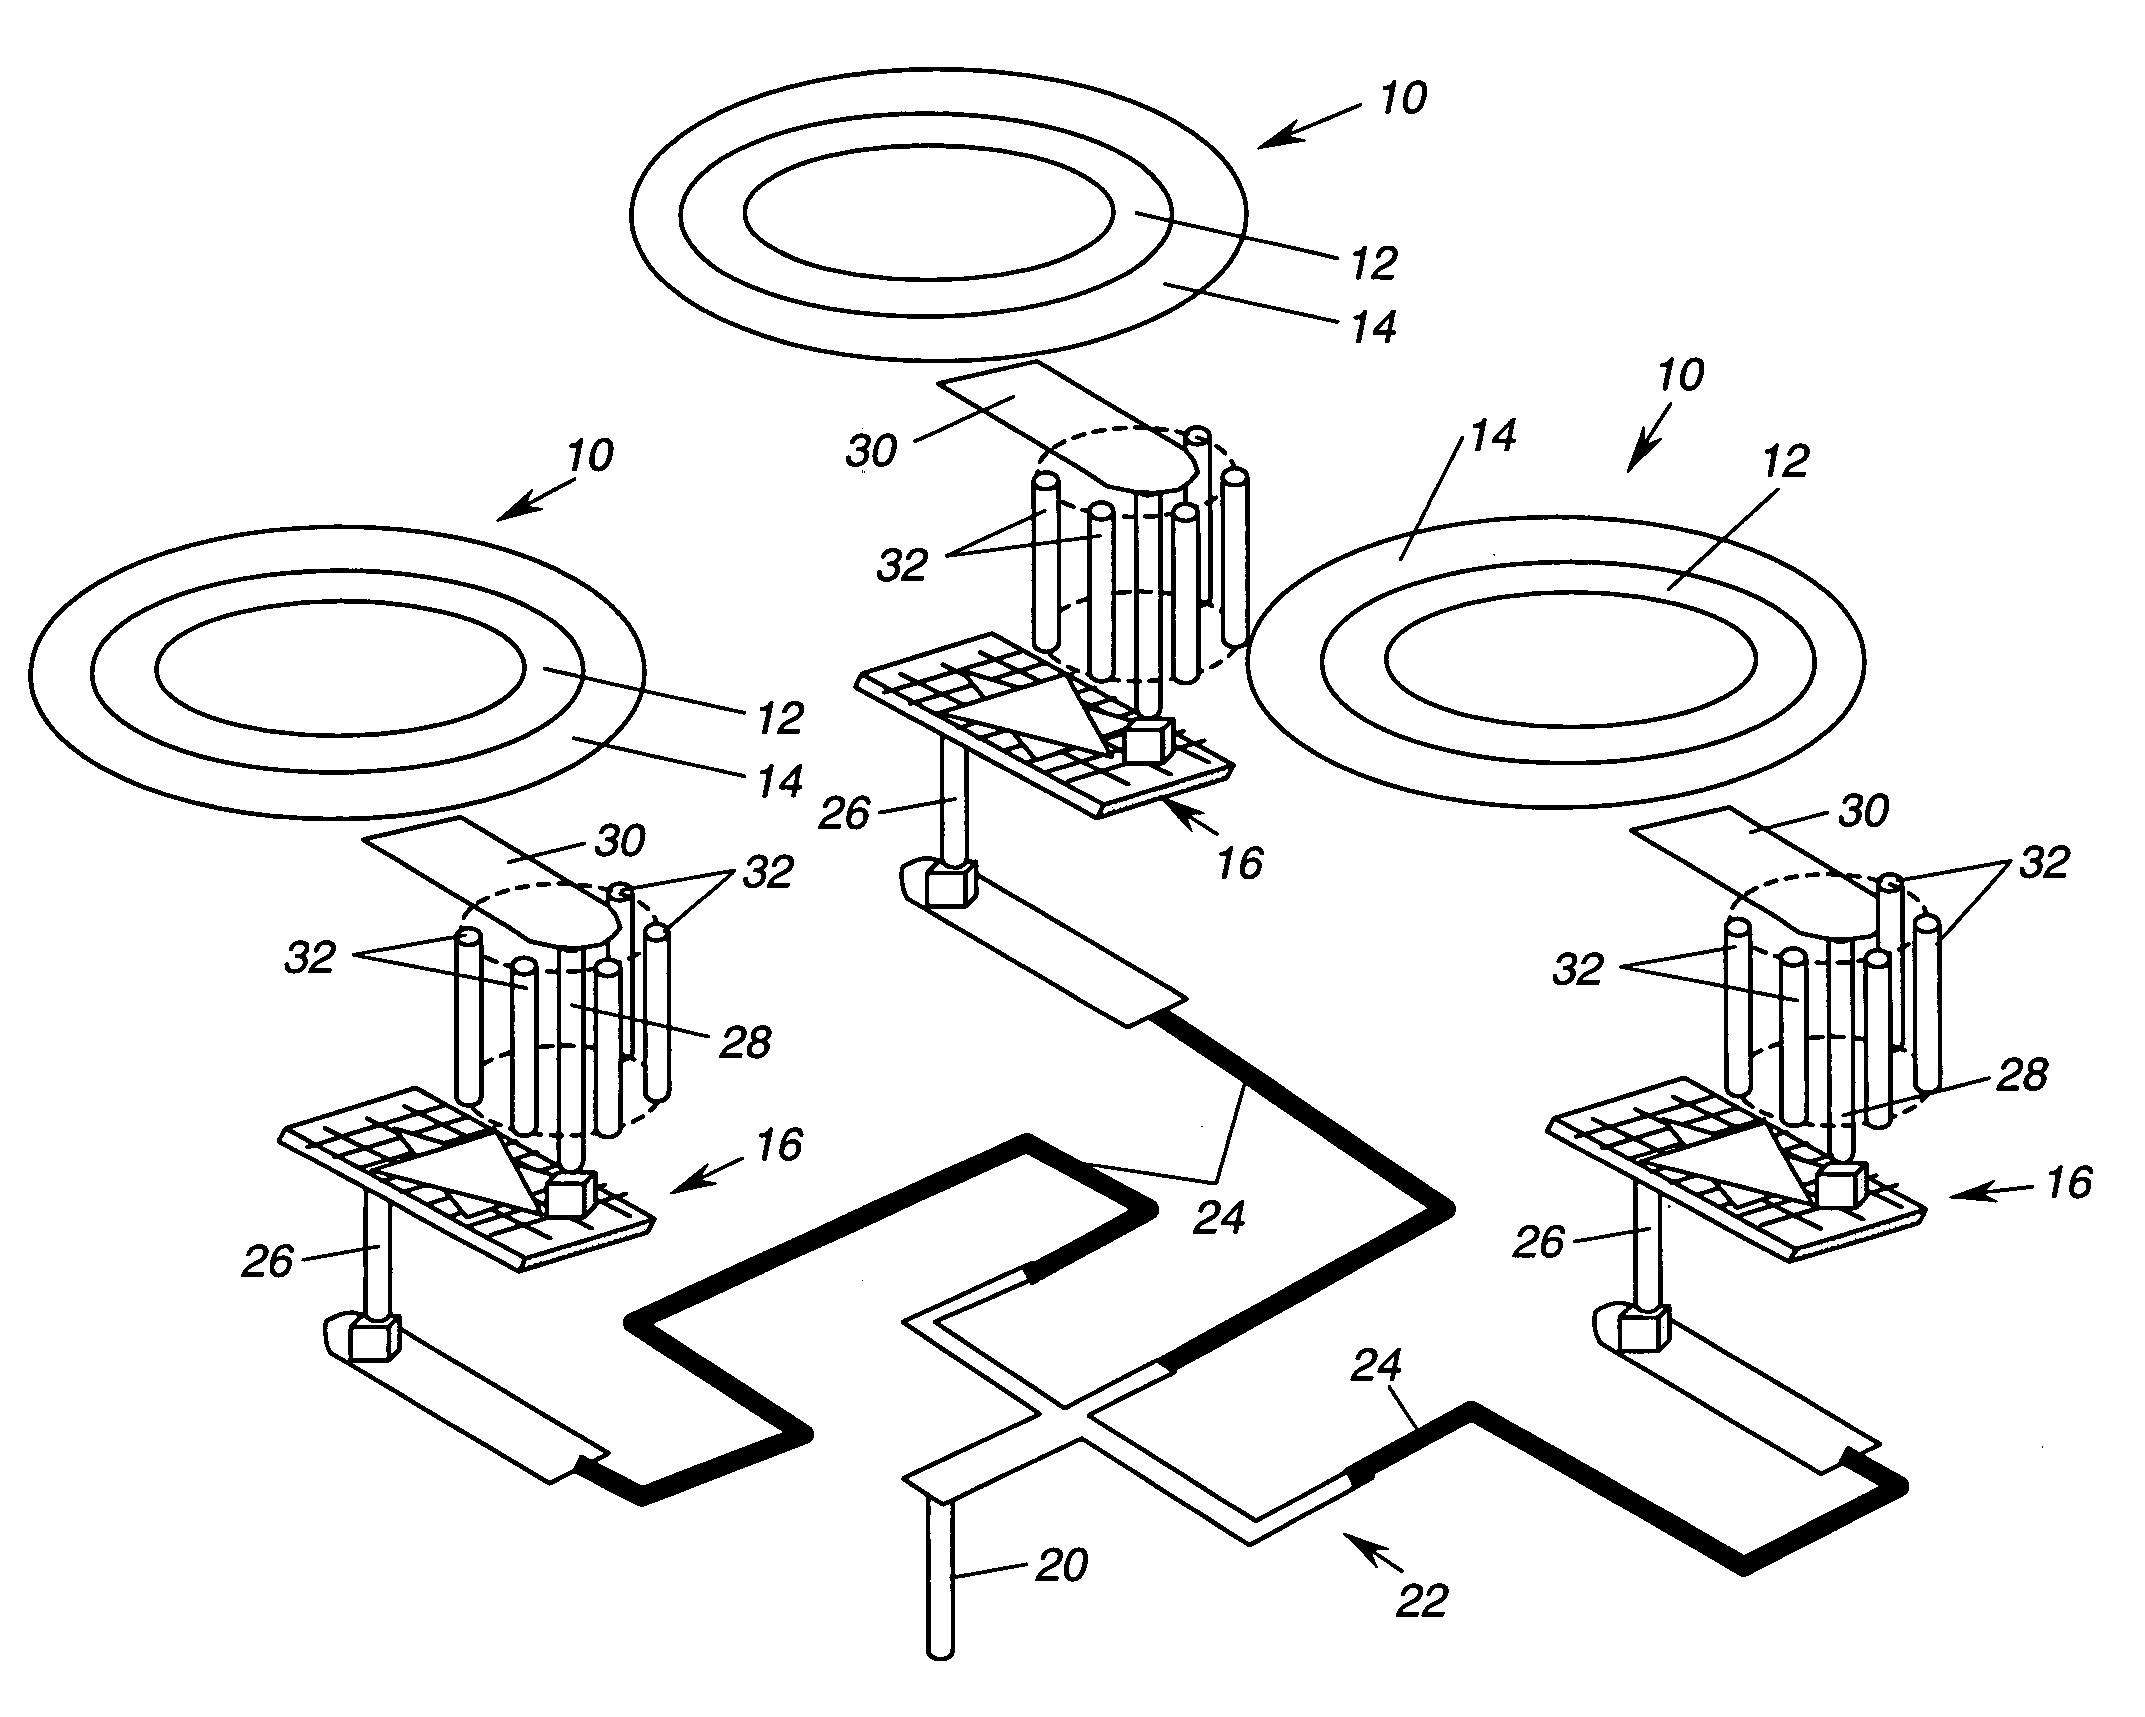 Millimeter wave phased array systems with ring slot radiator element